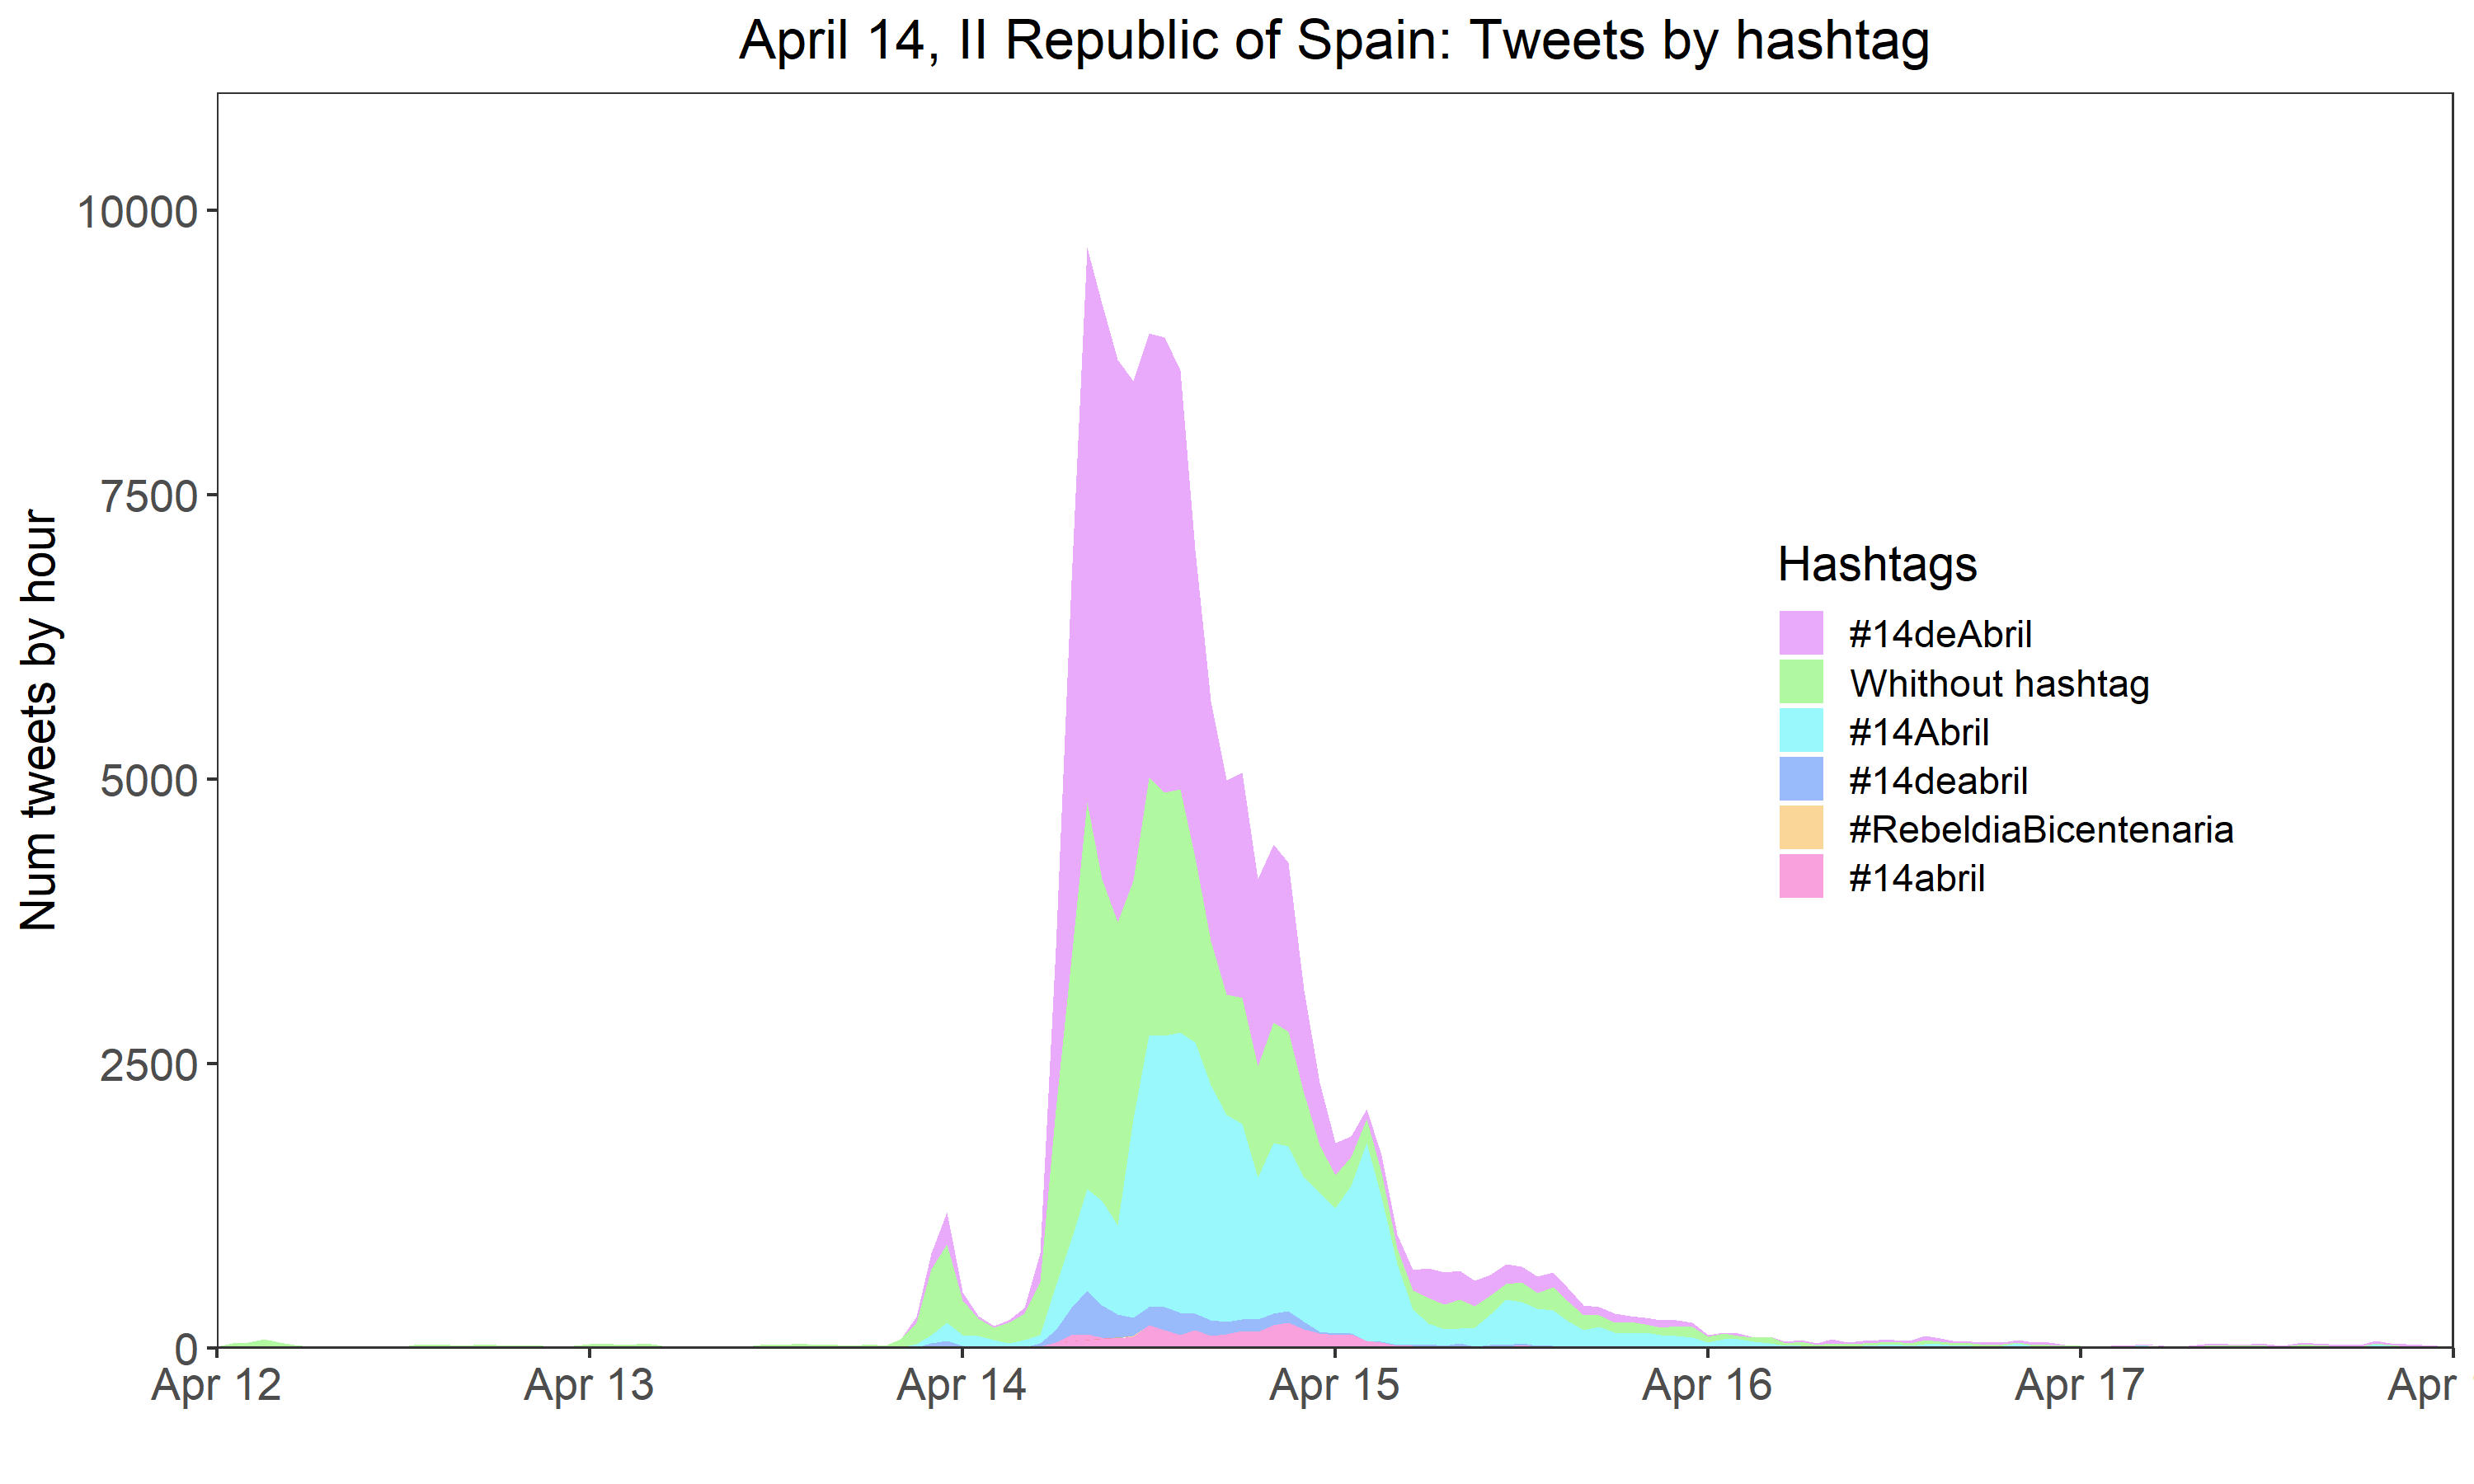 FIG. 2. PRESENCE OF HASHTAGS IN TWEETS